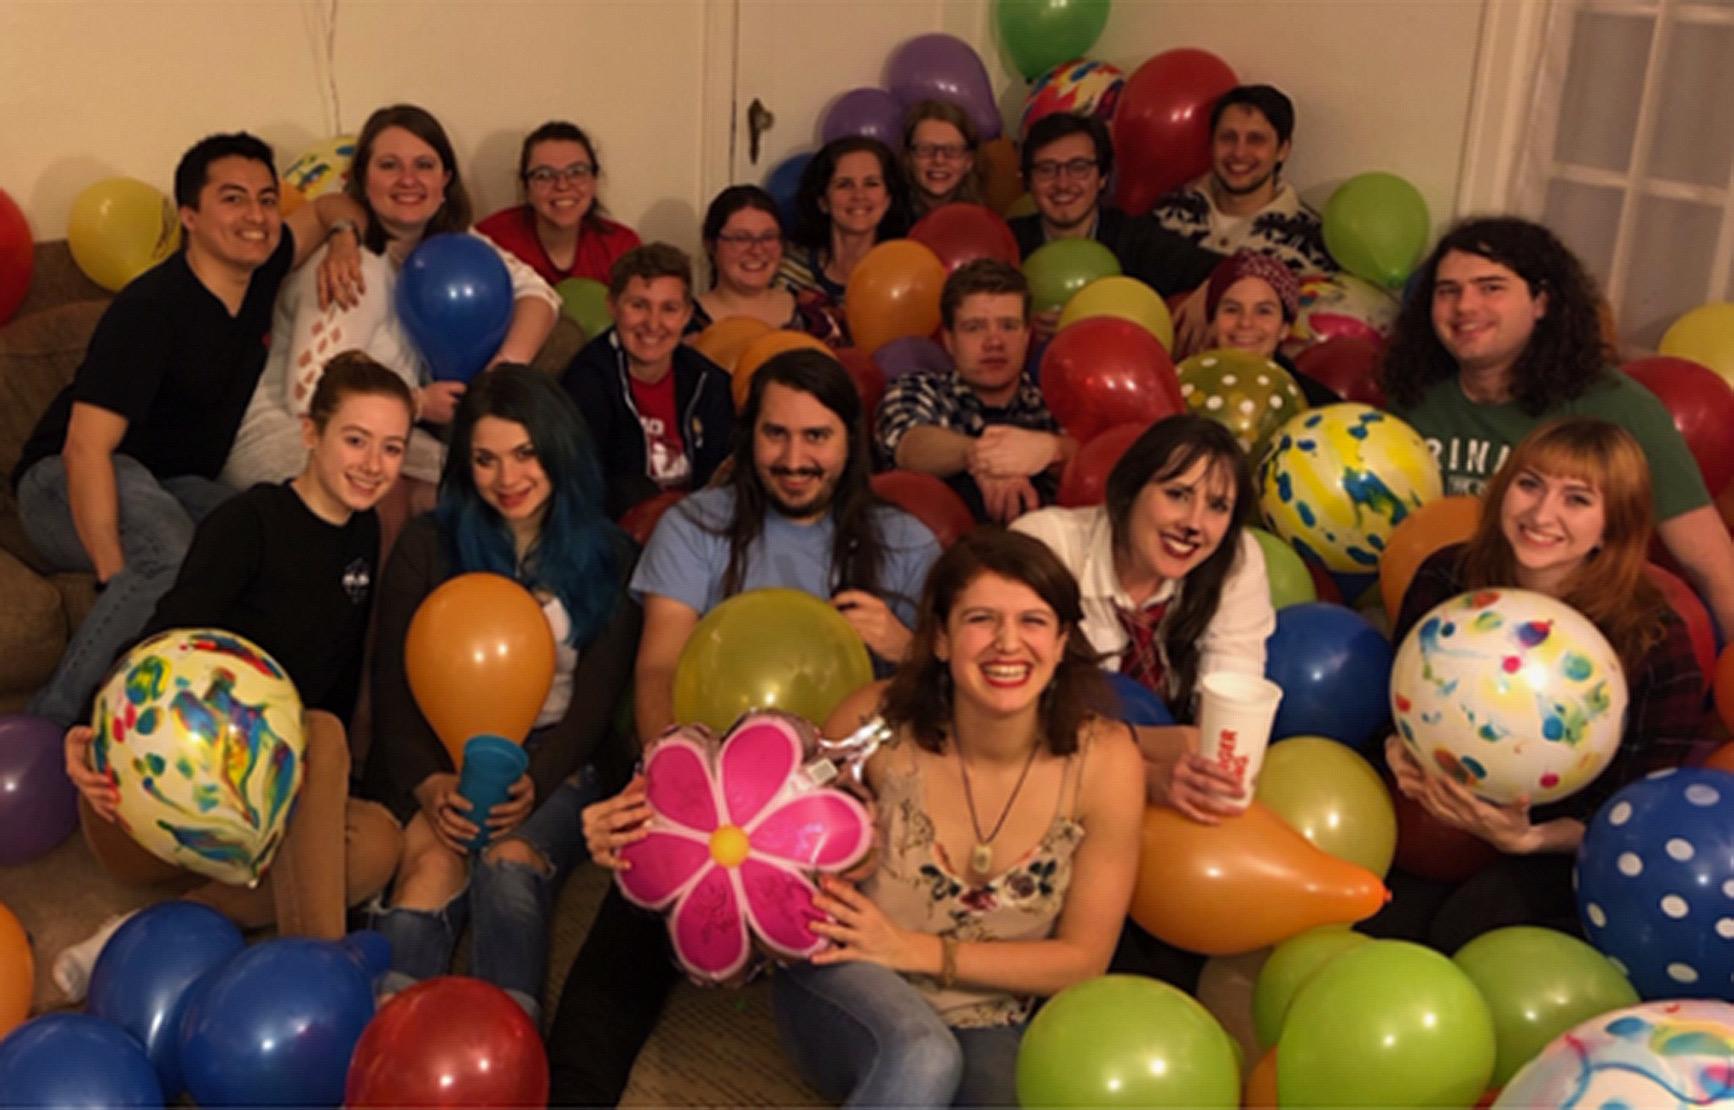 A group photo of the Graduate Student Association members in a living room sitting in a pile of balloons.